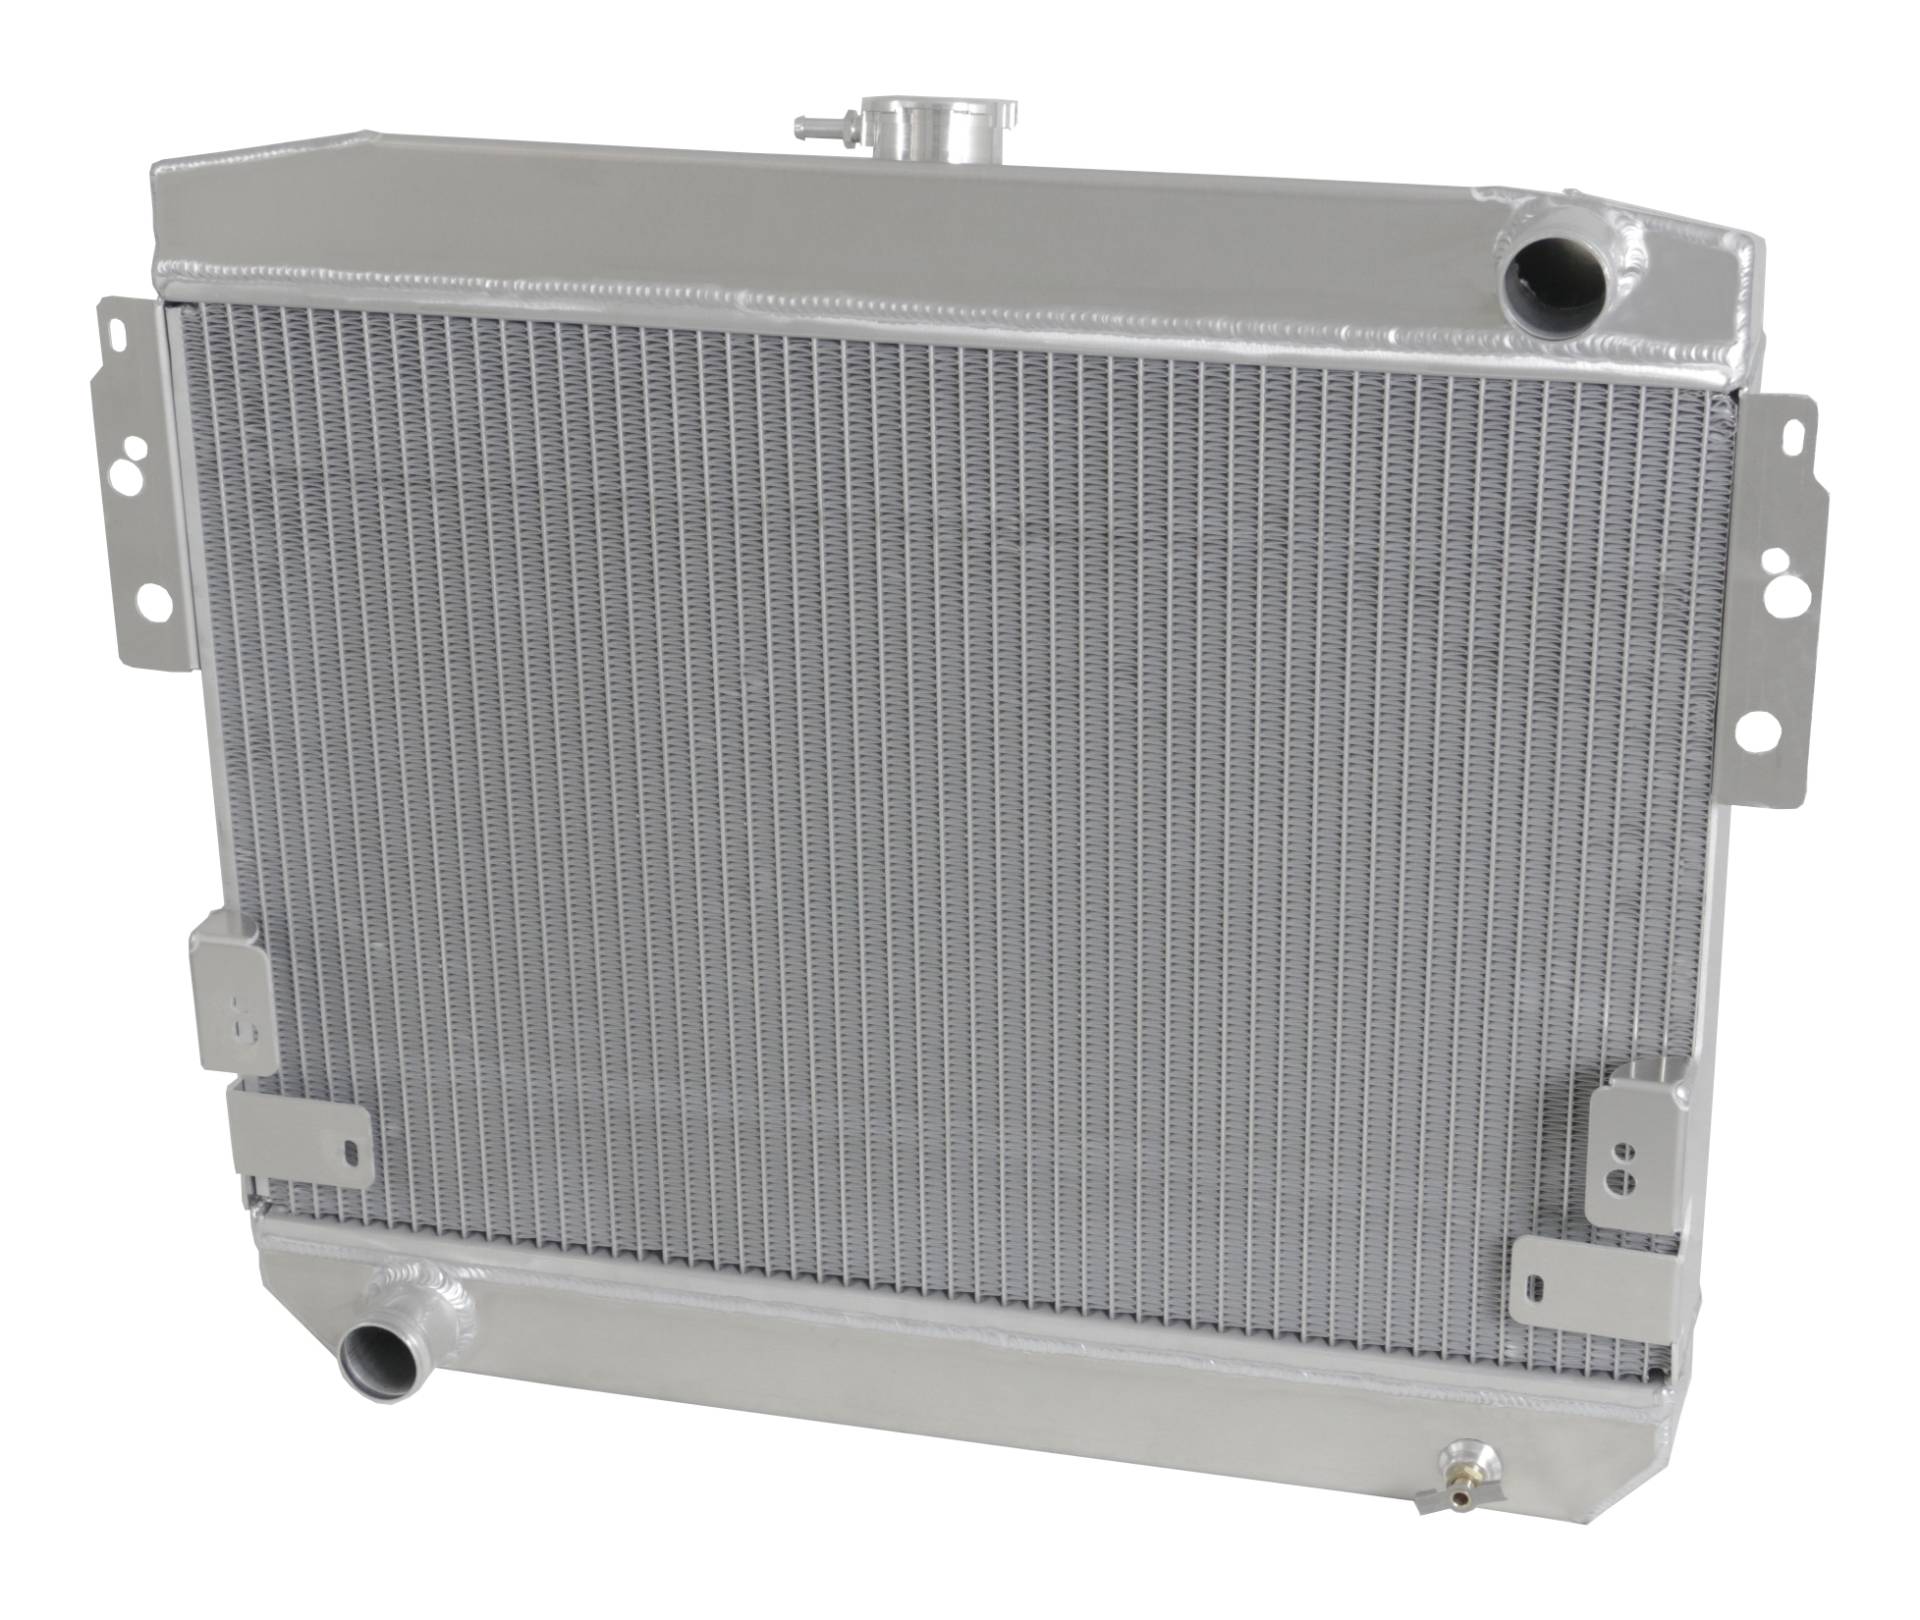 Wizard Cooling Inc - Wizard Cooling - 1974-1978 Ford Mustang II Aluminum Radiator - 514-100